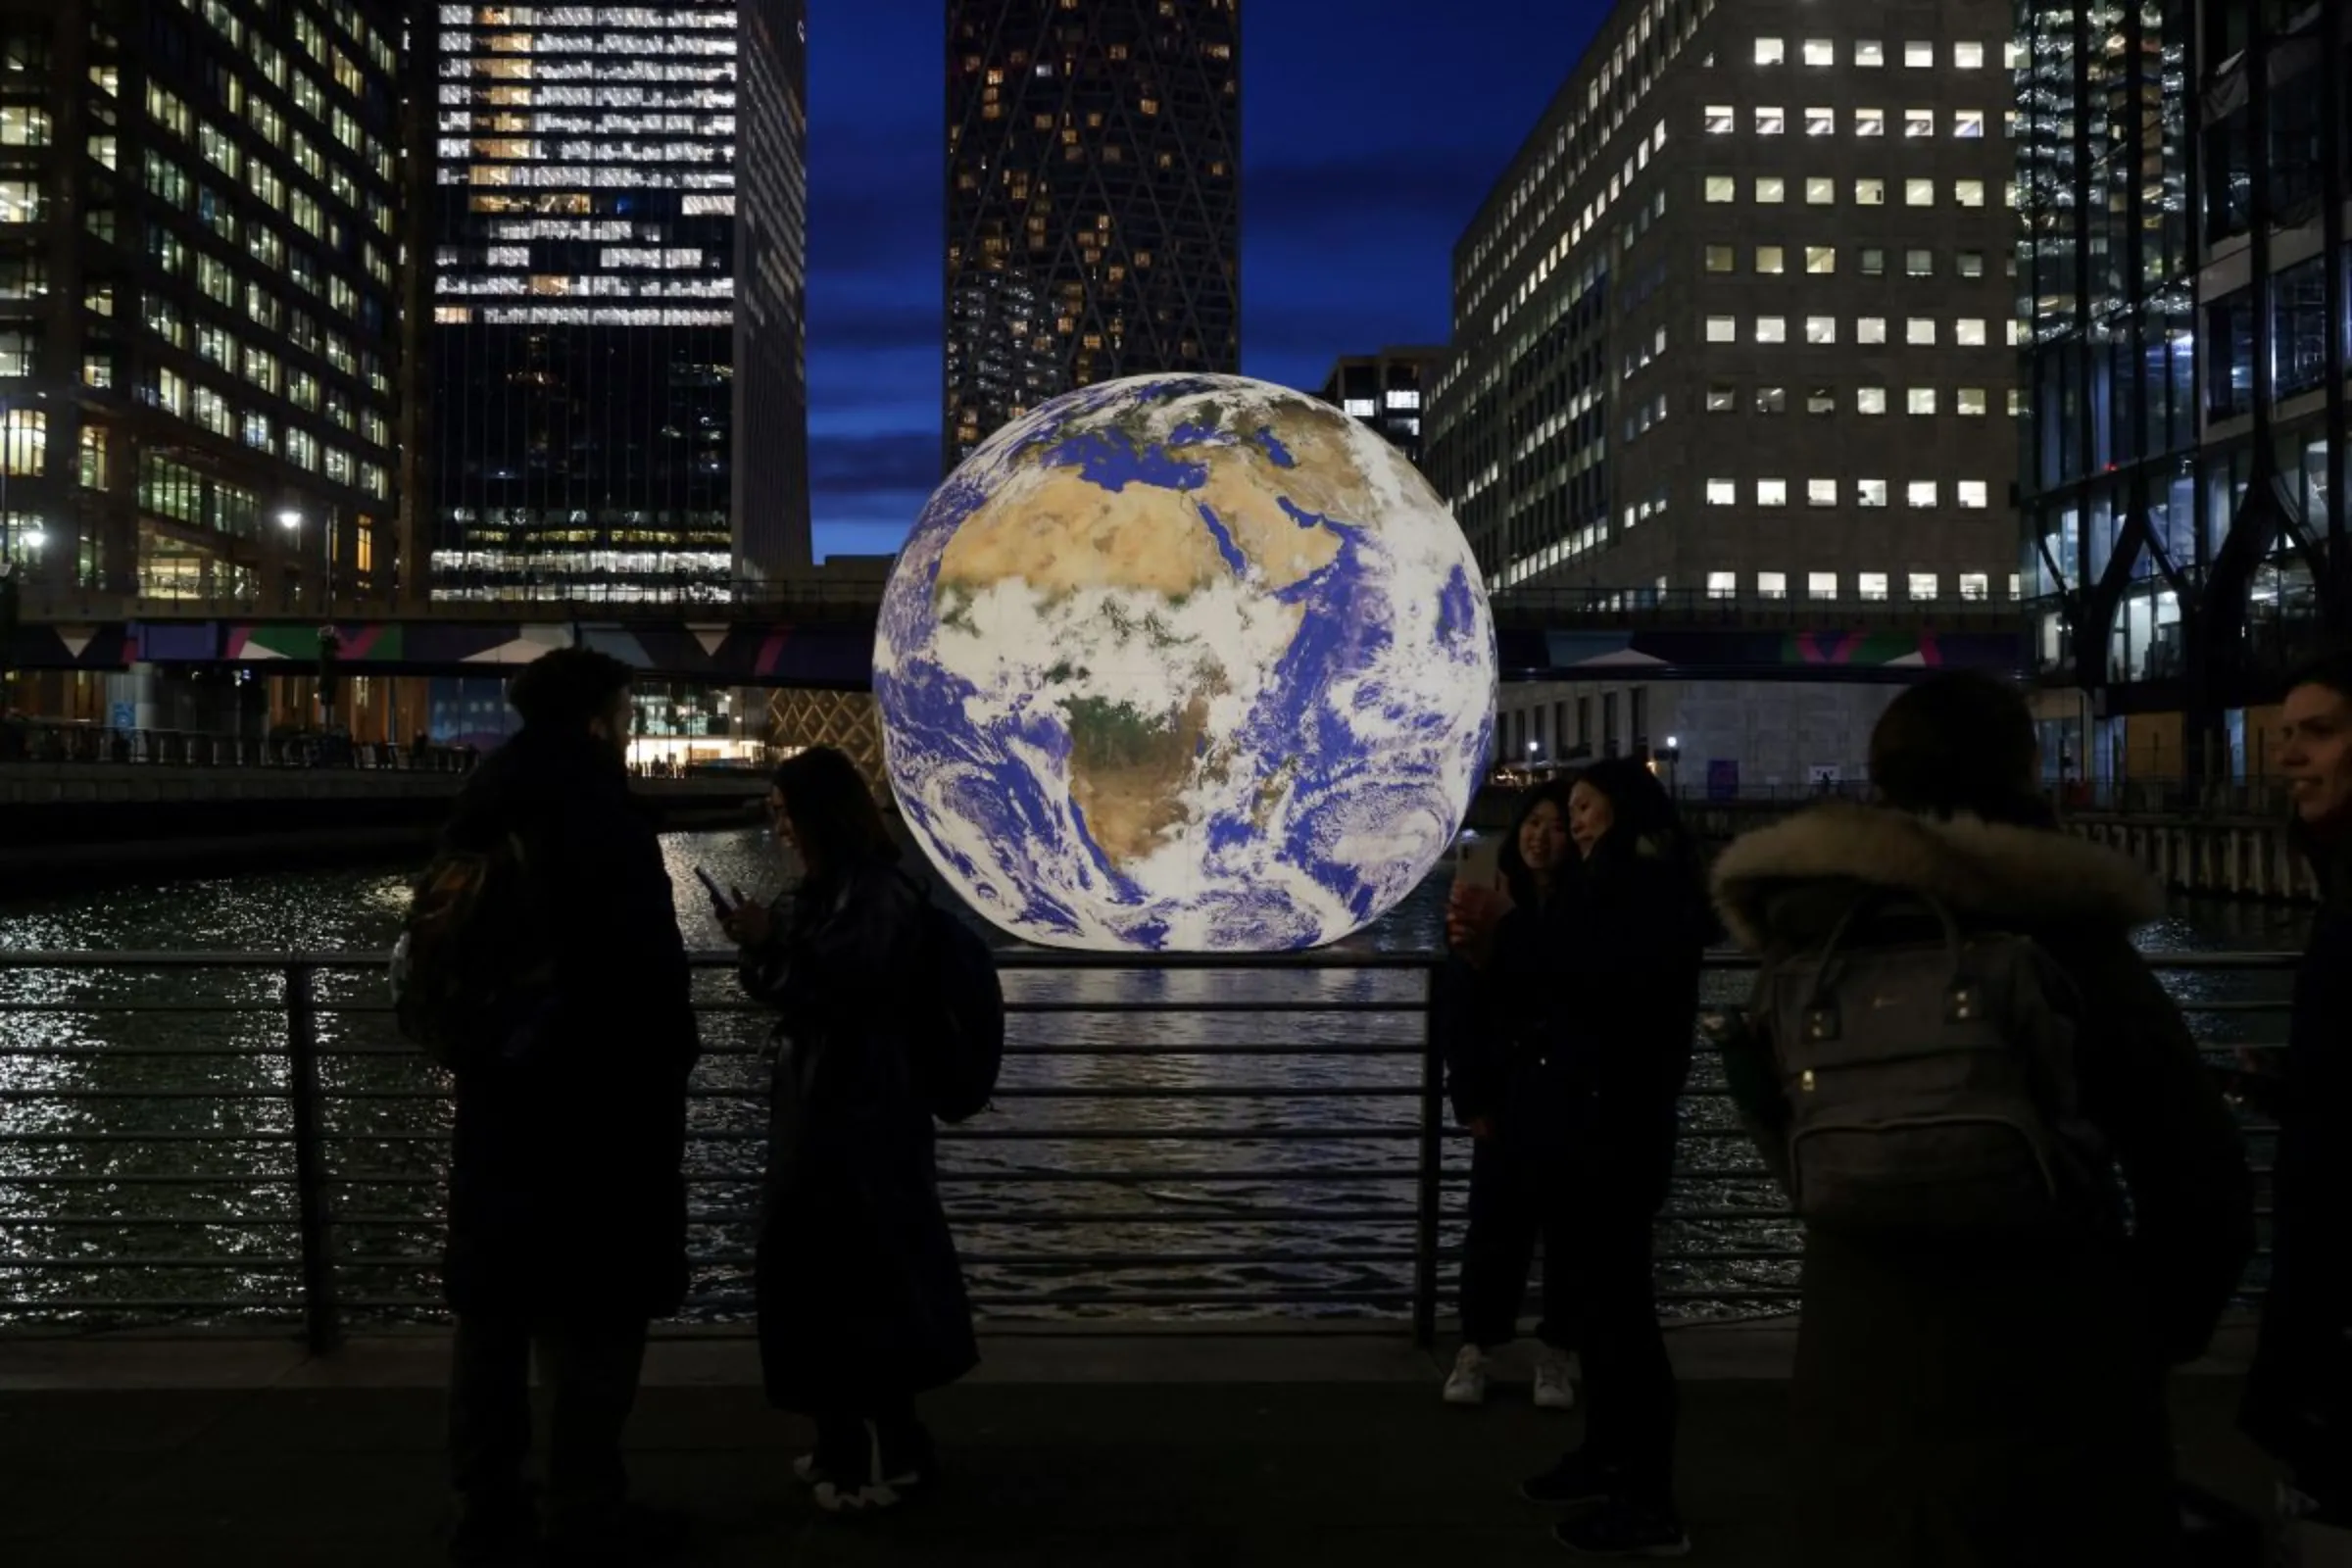 People look at Luke Jerram's 'Floating Earth', an installation as part of the Canary Wharf Winter Lights festival in the financial district in London, Britain, January 17, 2023